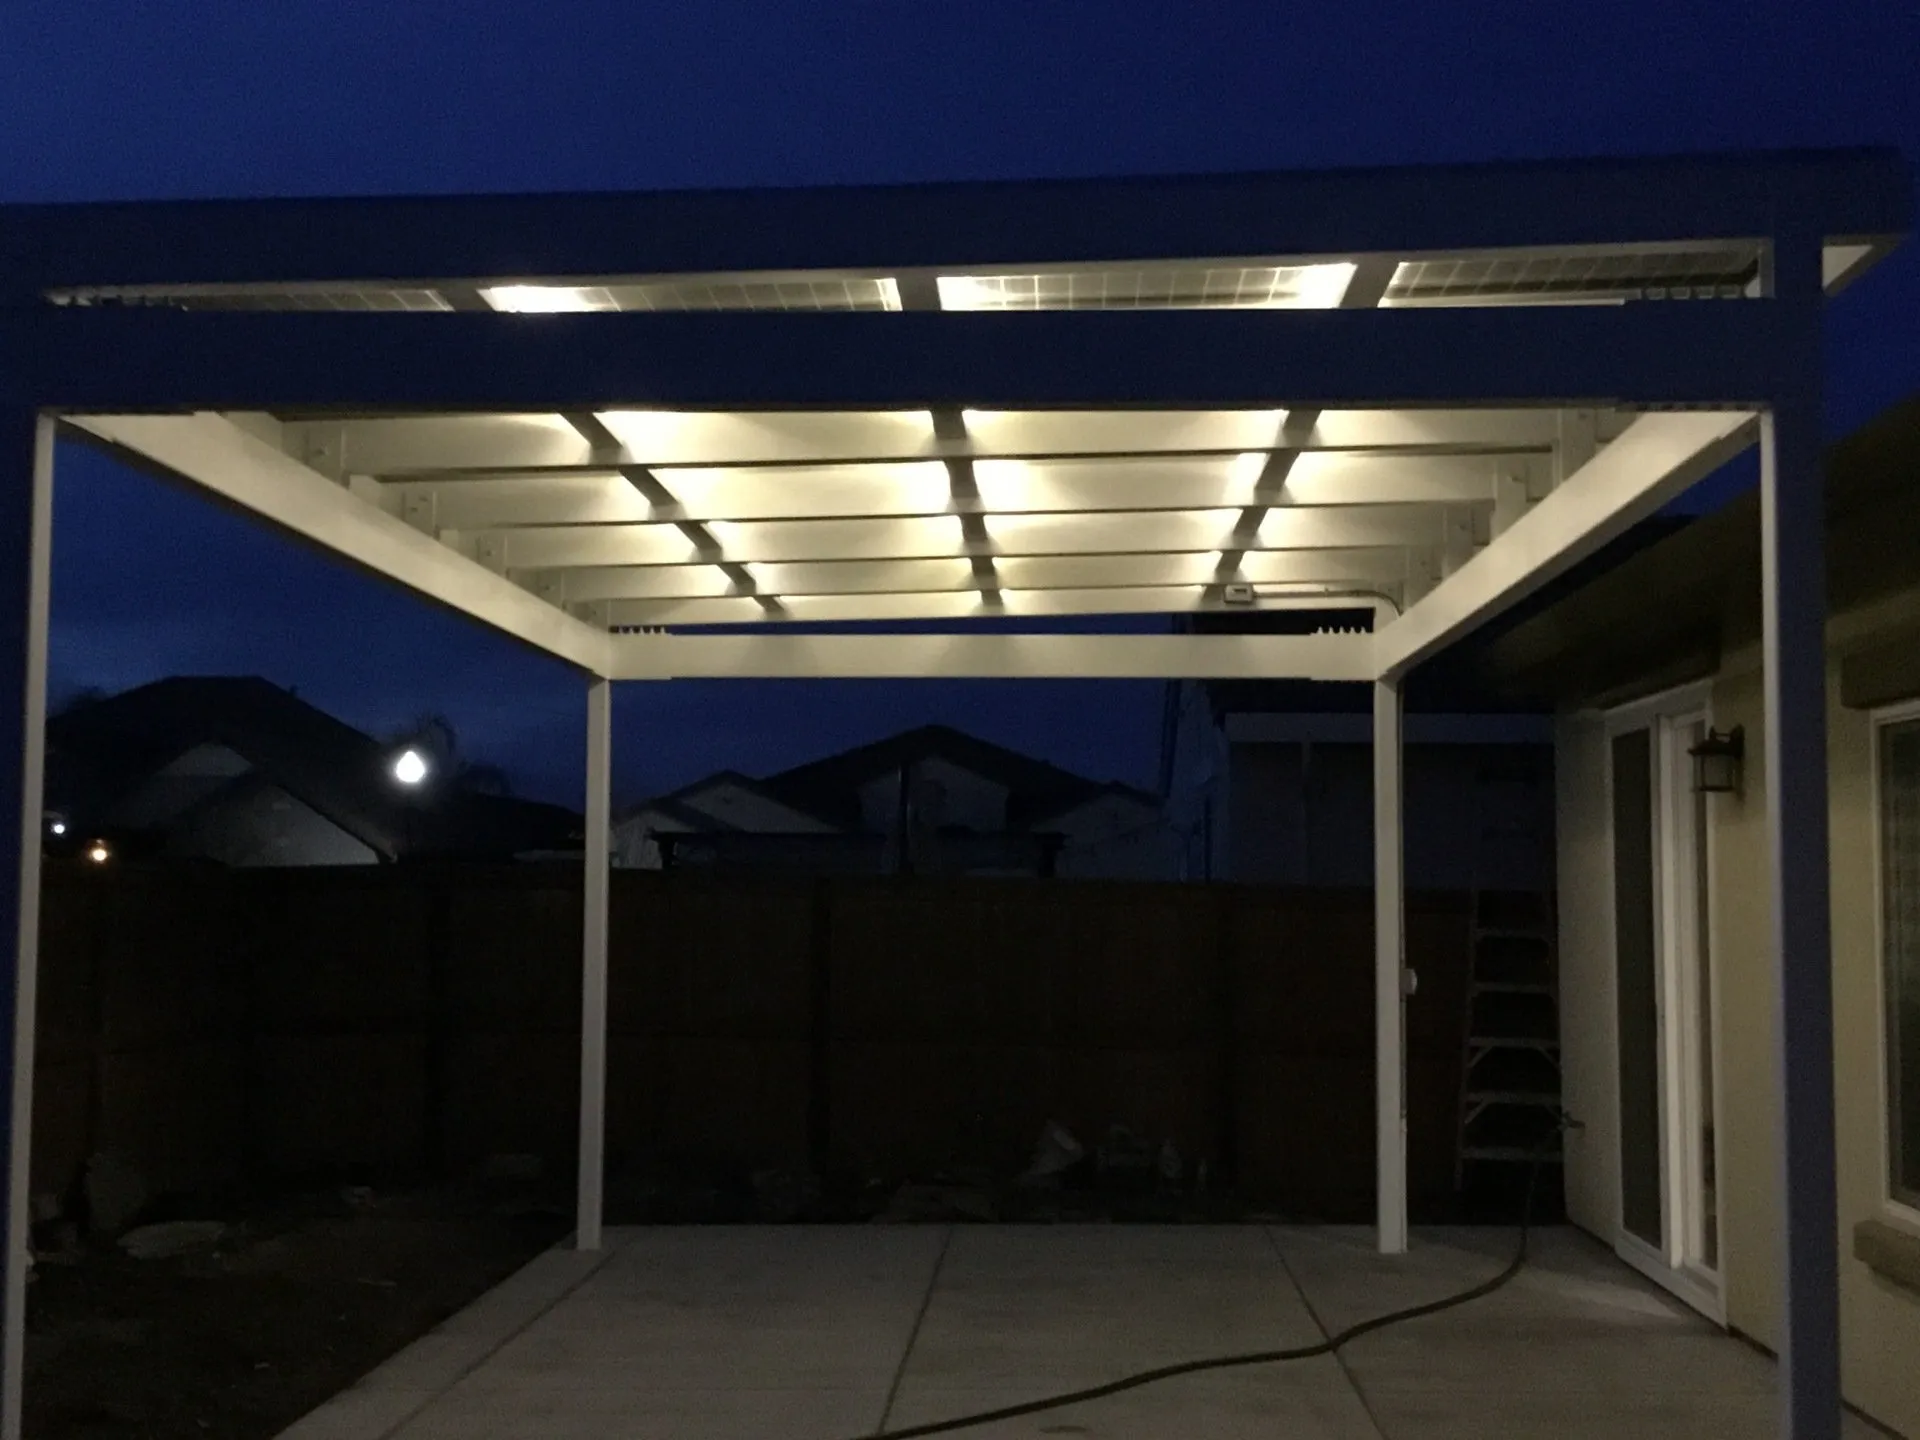 Solar Patio Cover - Night Time